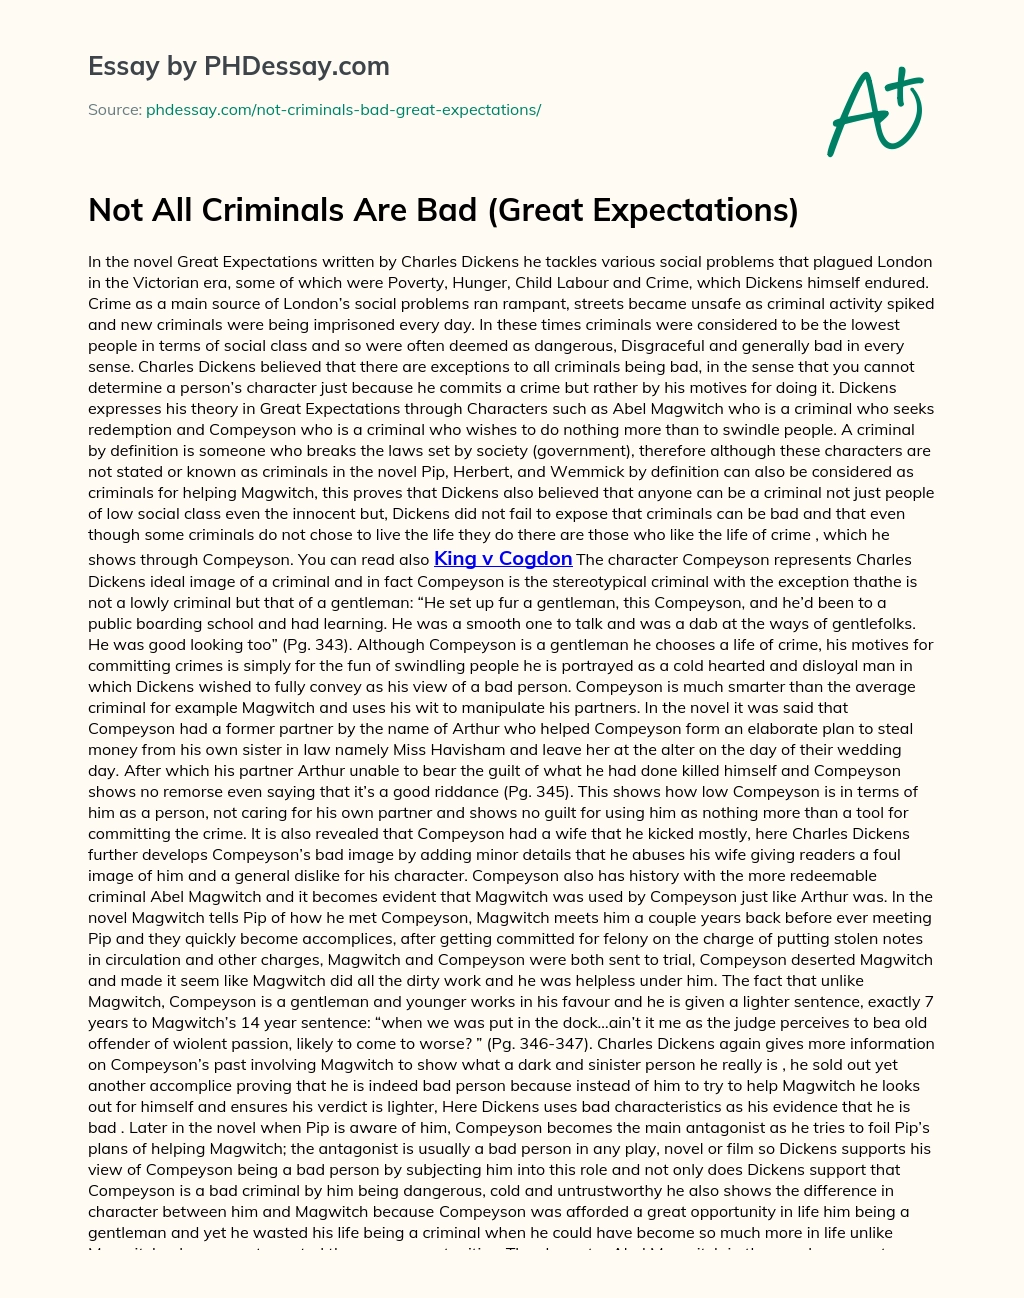 Not All Criminals Are Bad (Great Expectations) essay